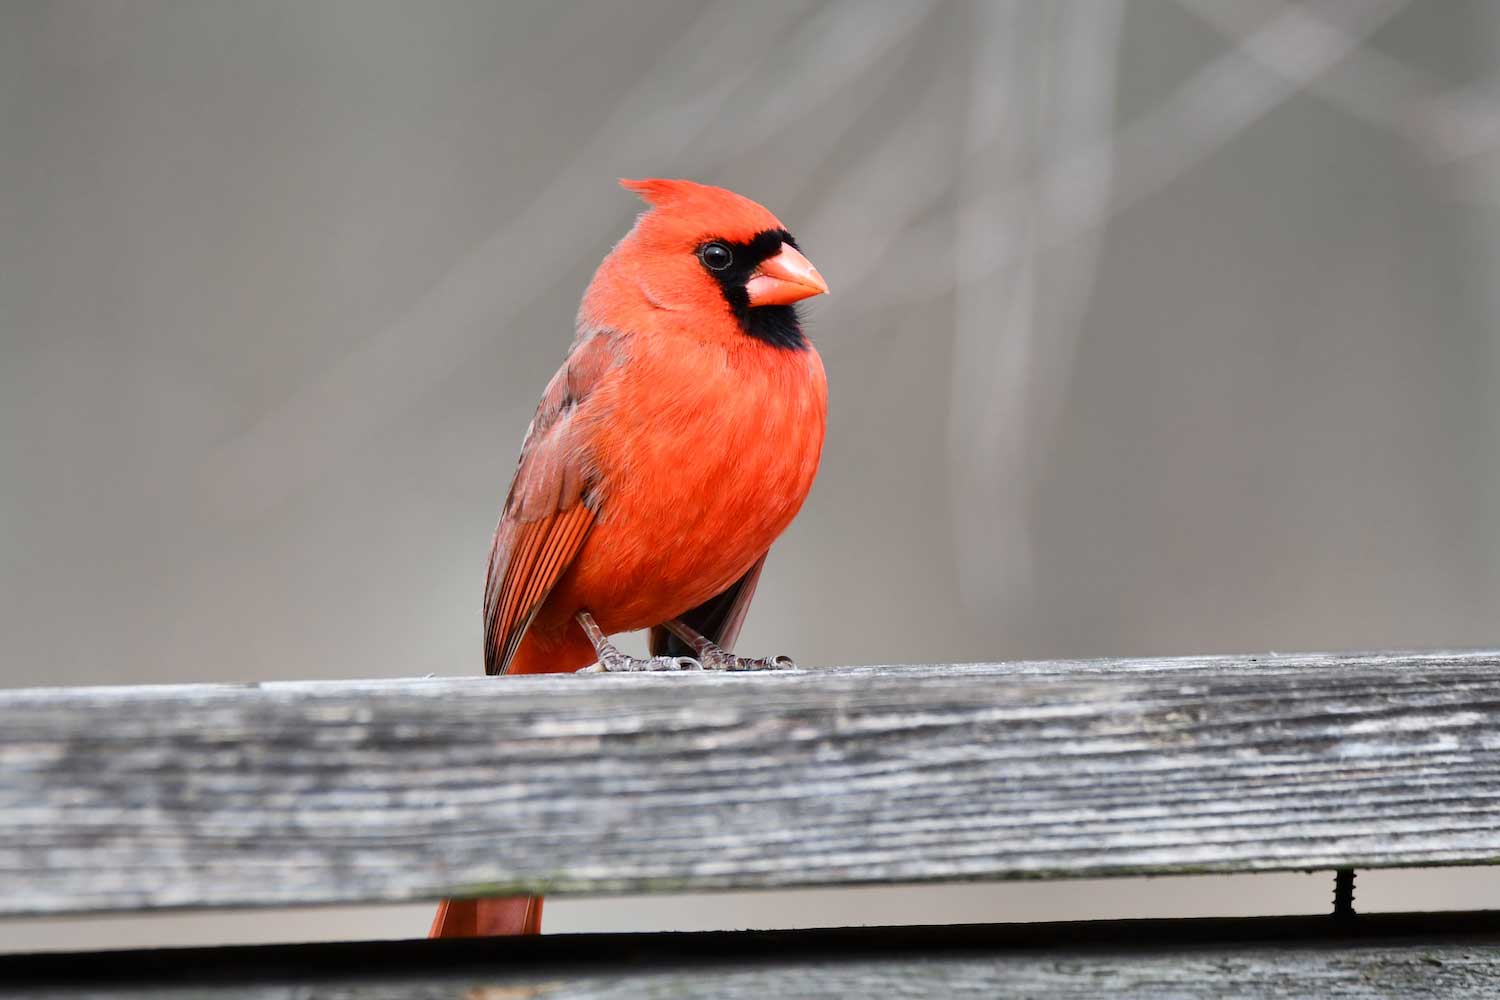 A northern cardinal perched on a wooden railing.